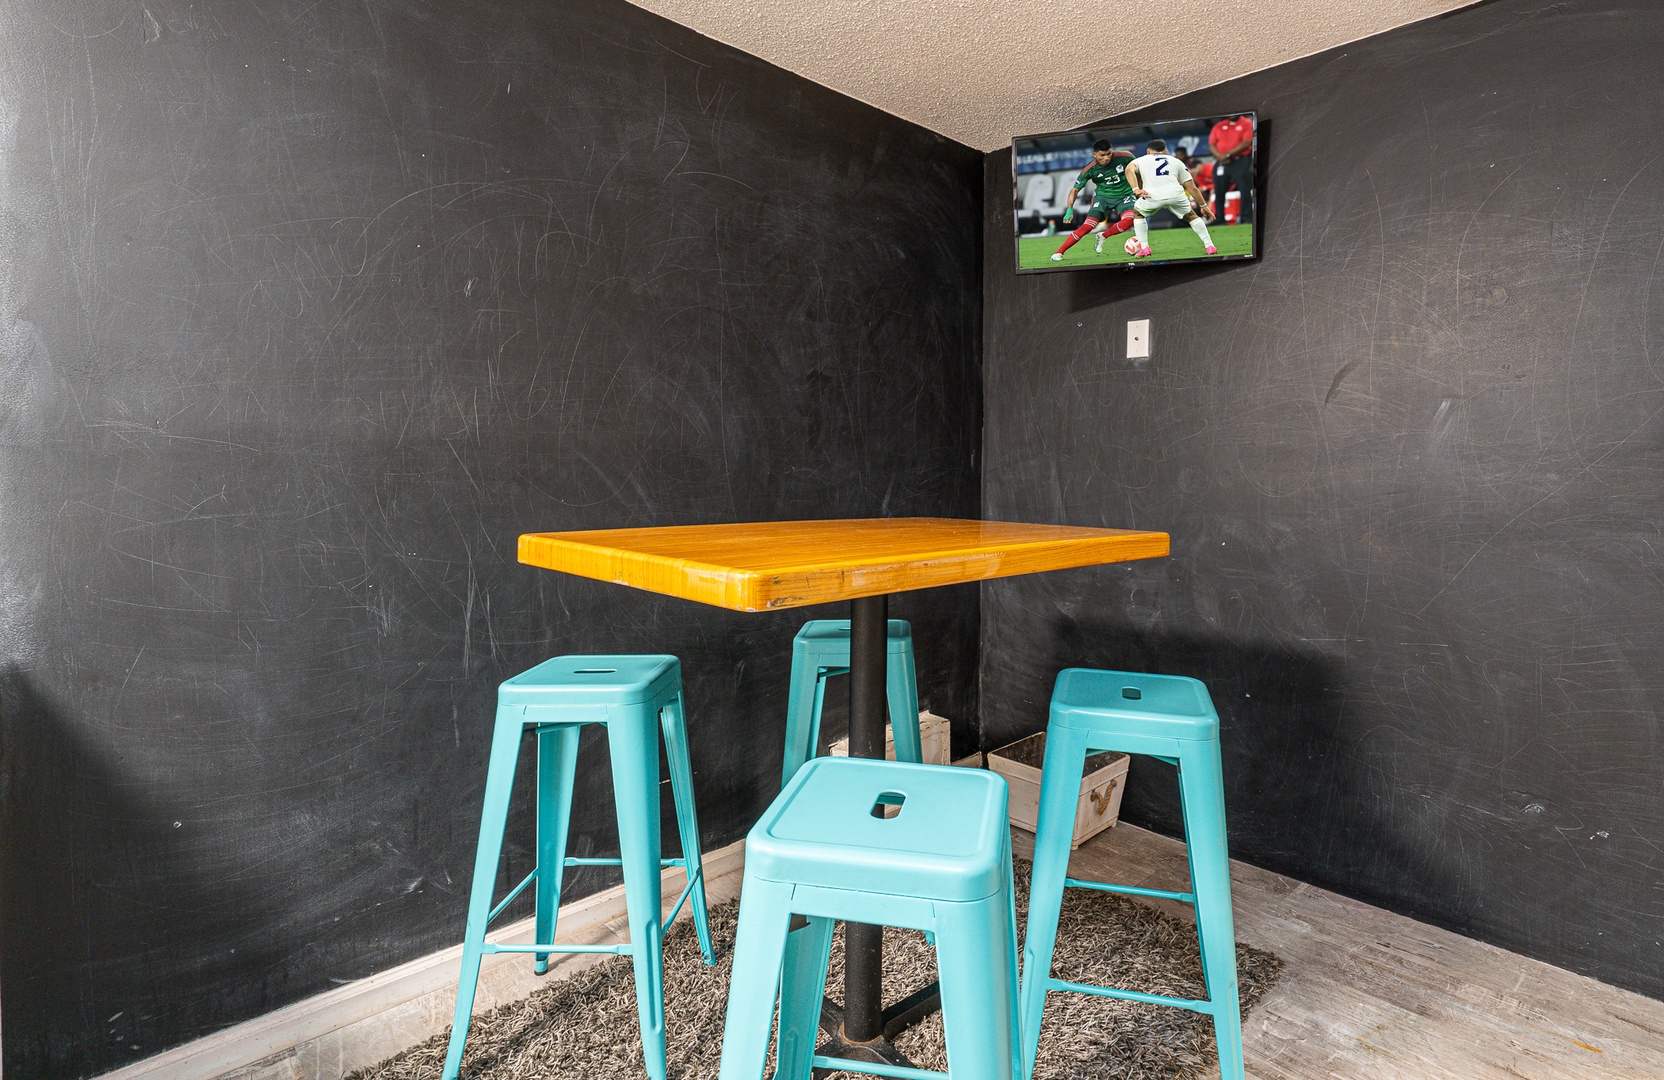 Play a round of cards or enjoy a snack at the game room table, with space for 4